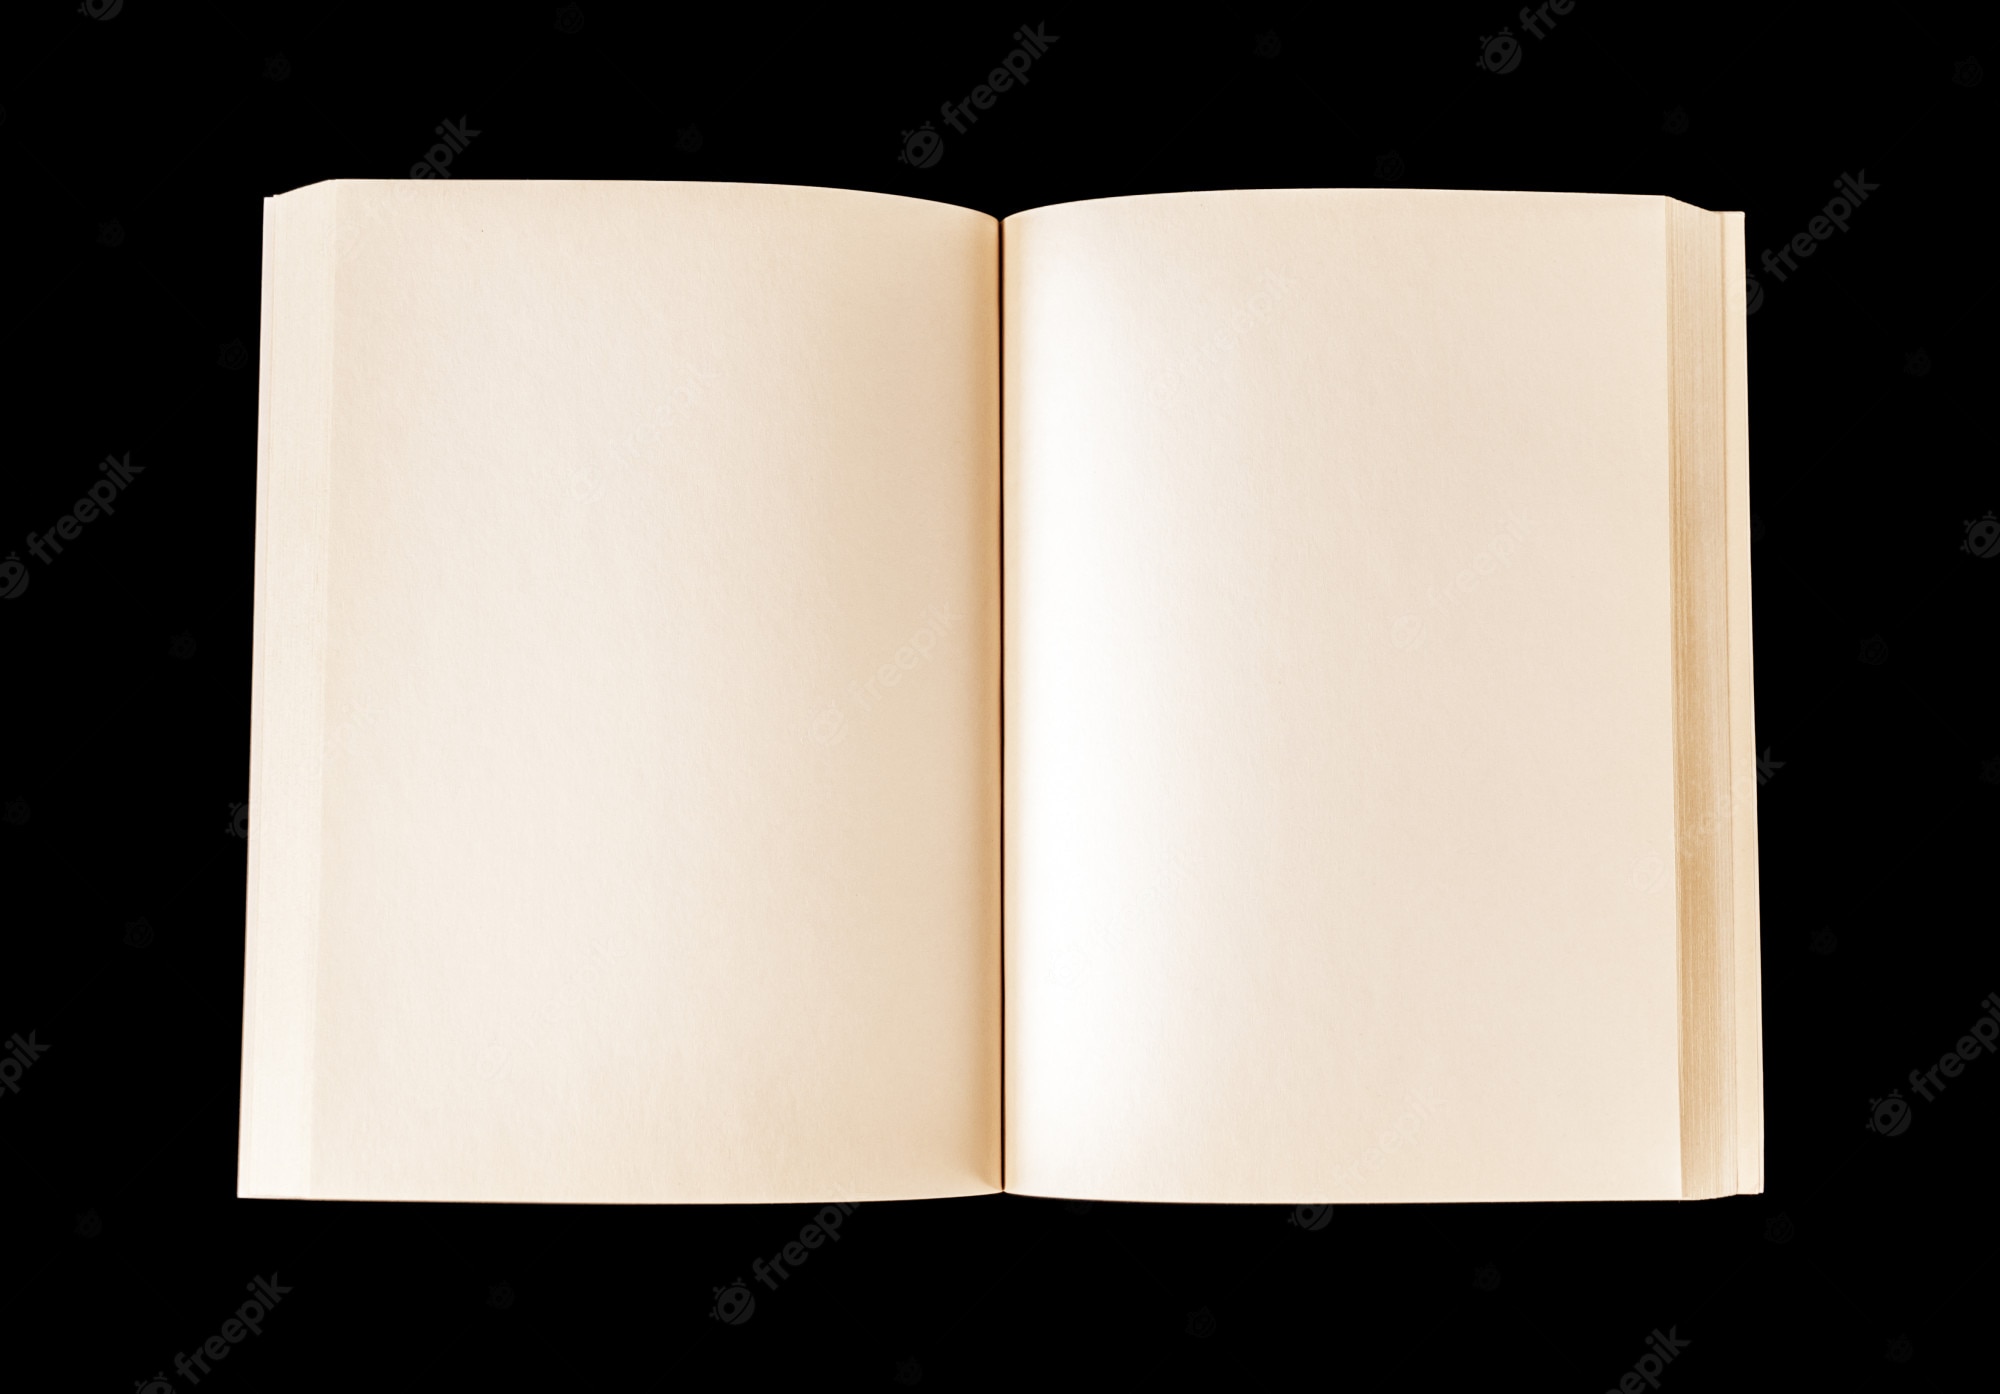 Premium Photo. Old open blank book isolated